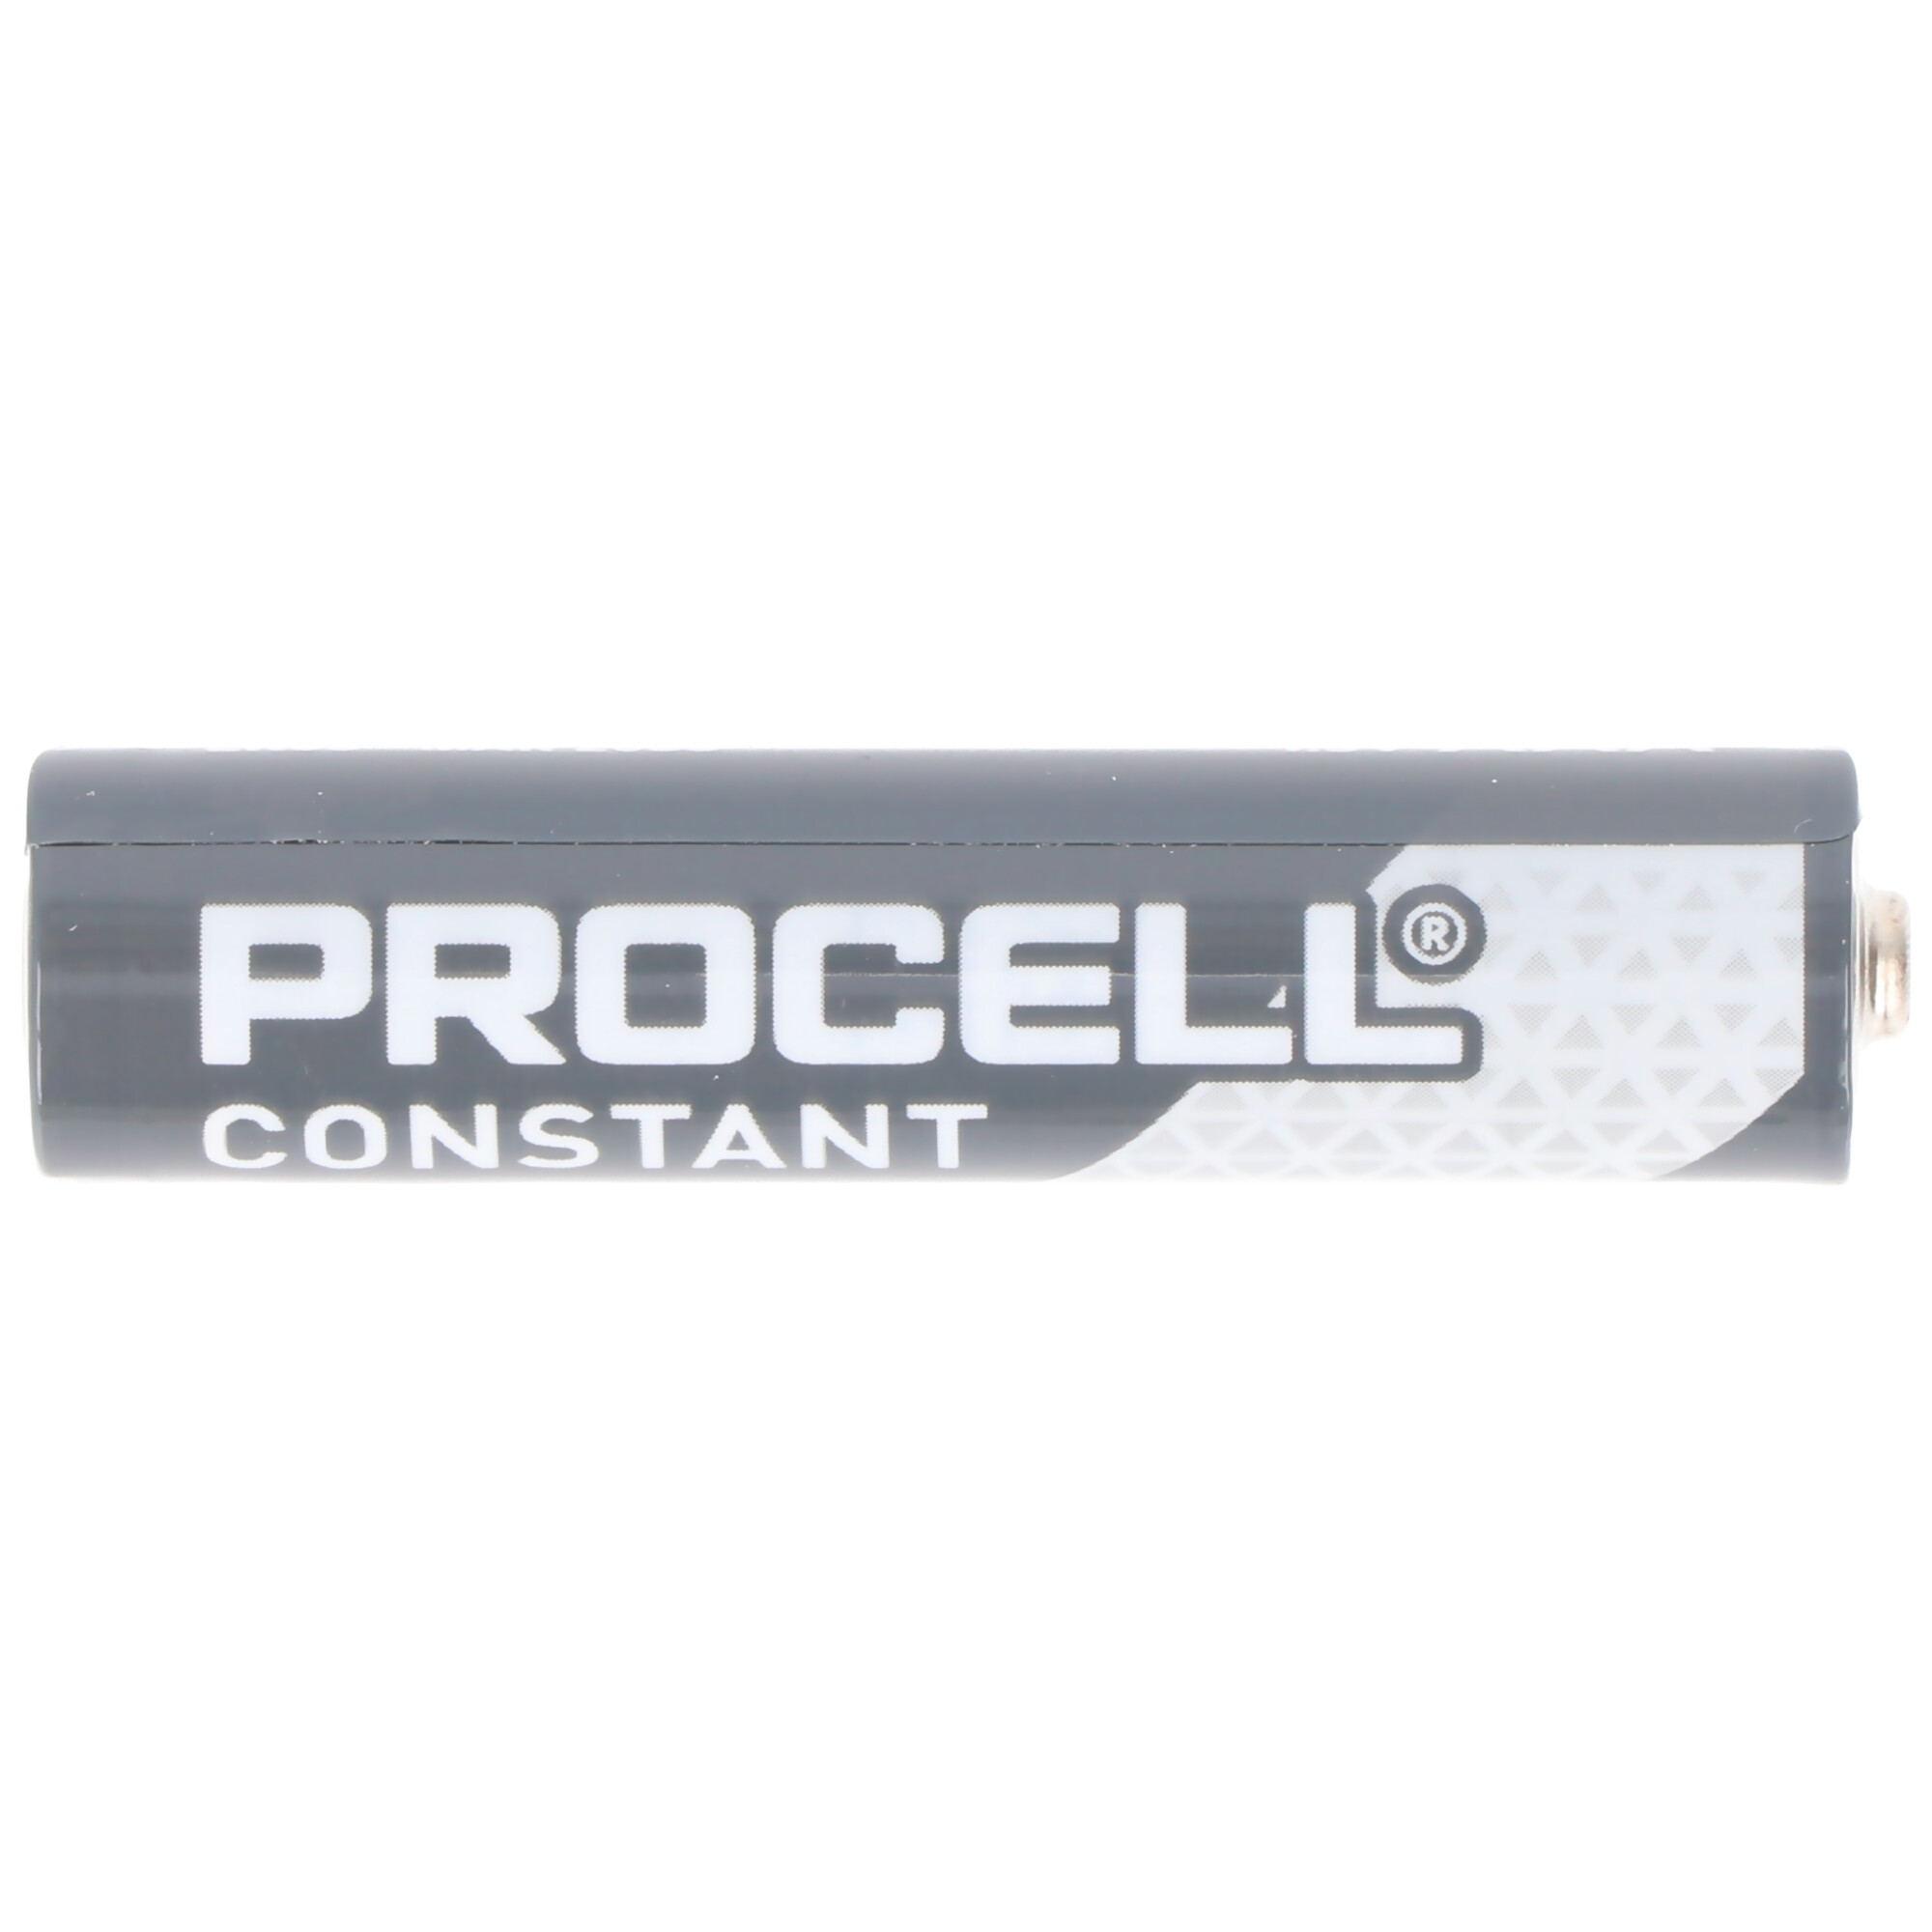 Duracell Batterie Alkaline, Micro, AAA, LR03, 1.5V Procell Constant, Retail Box (10-Pack)